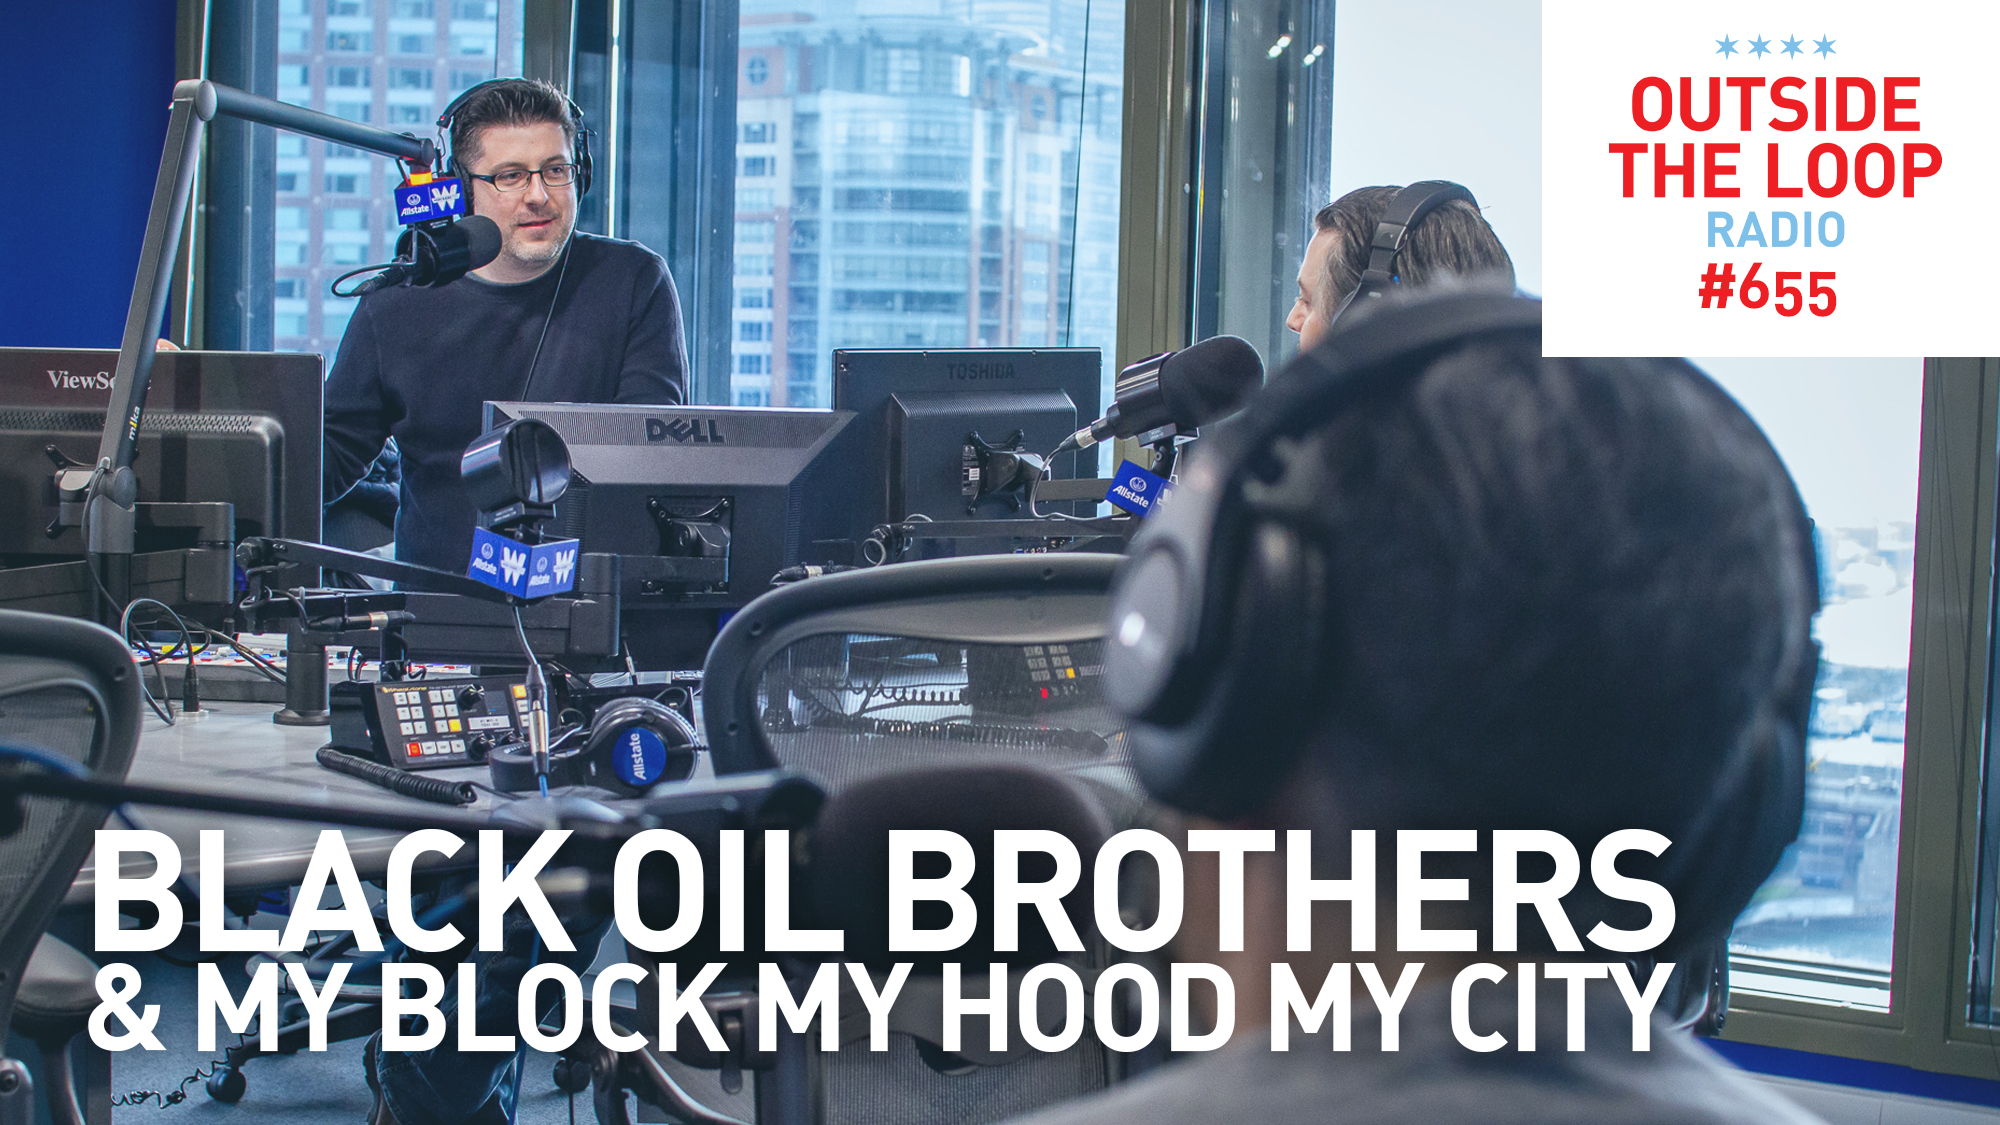 Mike Stephen welcomes The Black Oil Brothers into the WGN Radio studio.